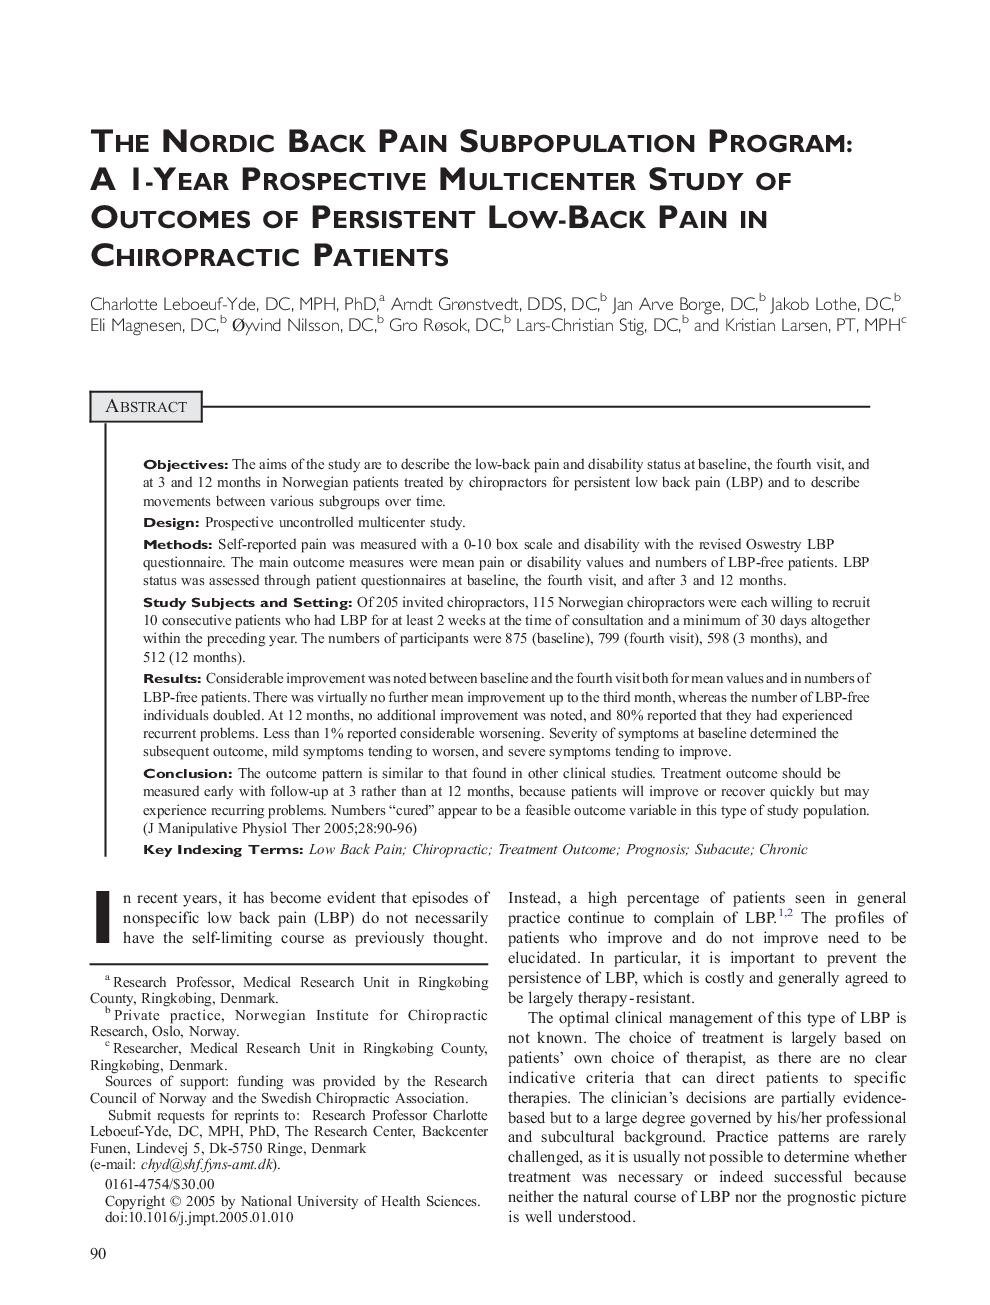 The Nordic Back Pain Subpopulation Program: A 1-Year Prospective Multicenter Study of Outcomes of Persistent Low-Back Pain in Chiropractic Patients